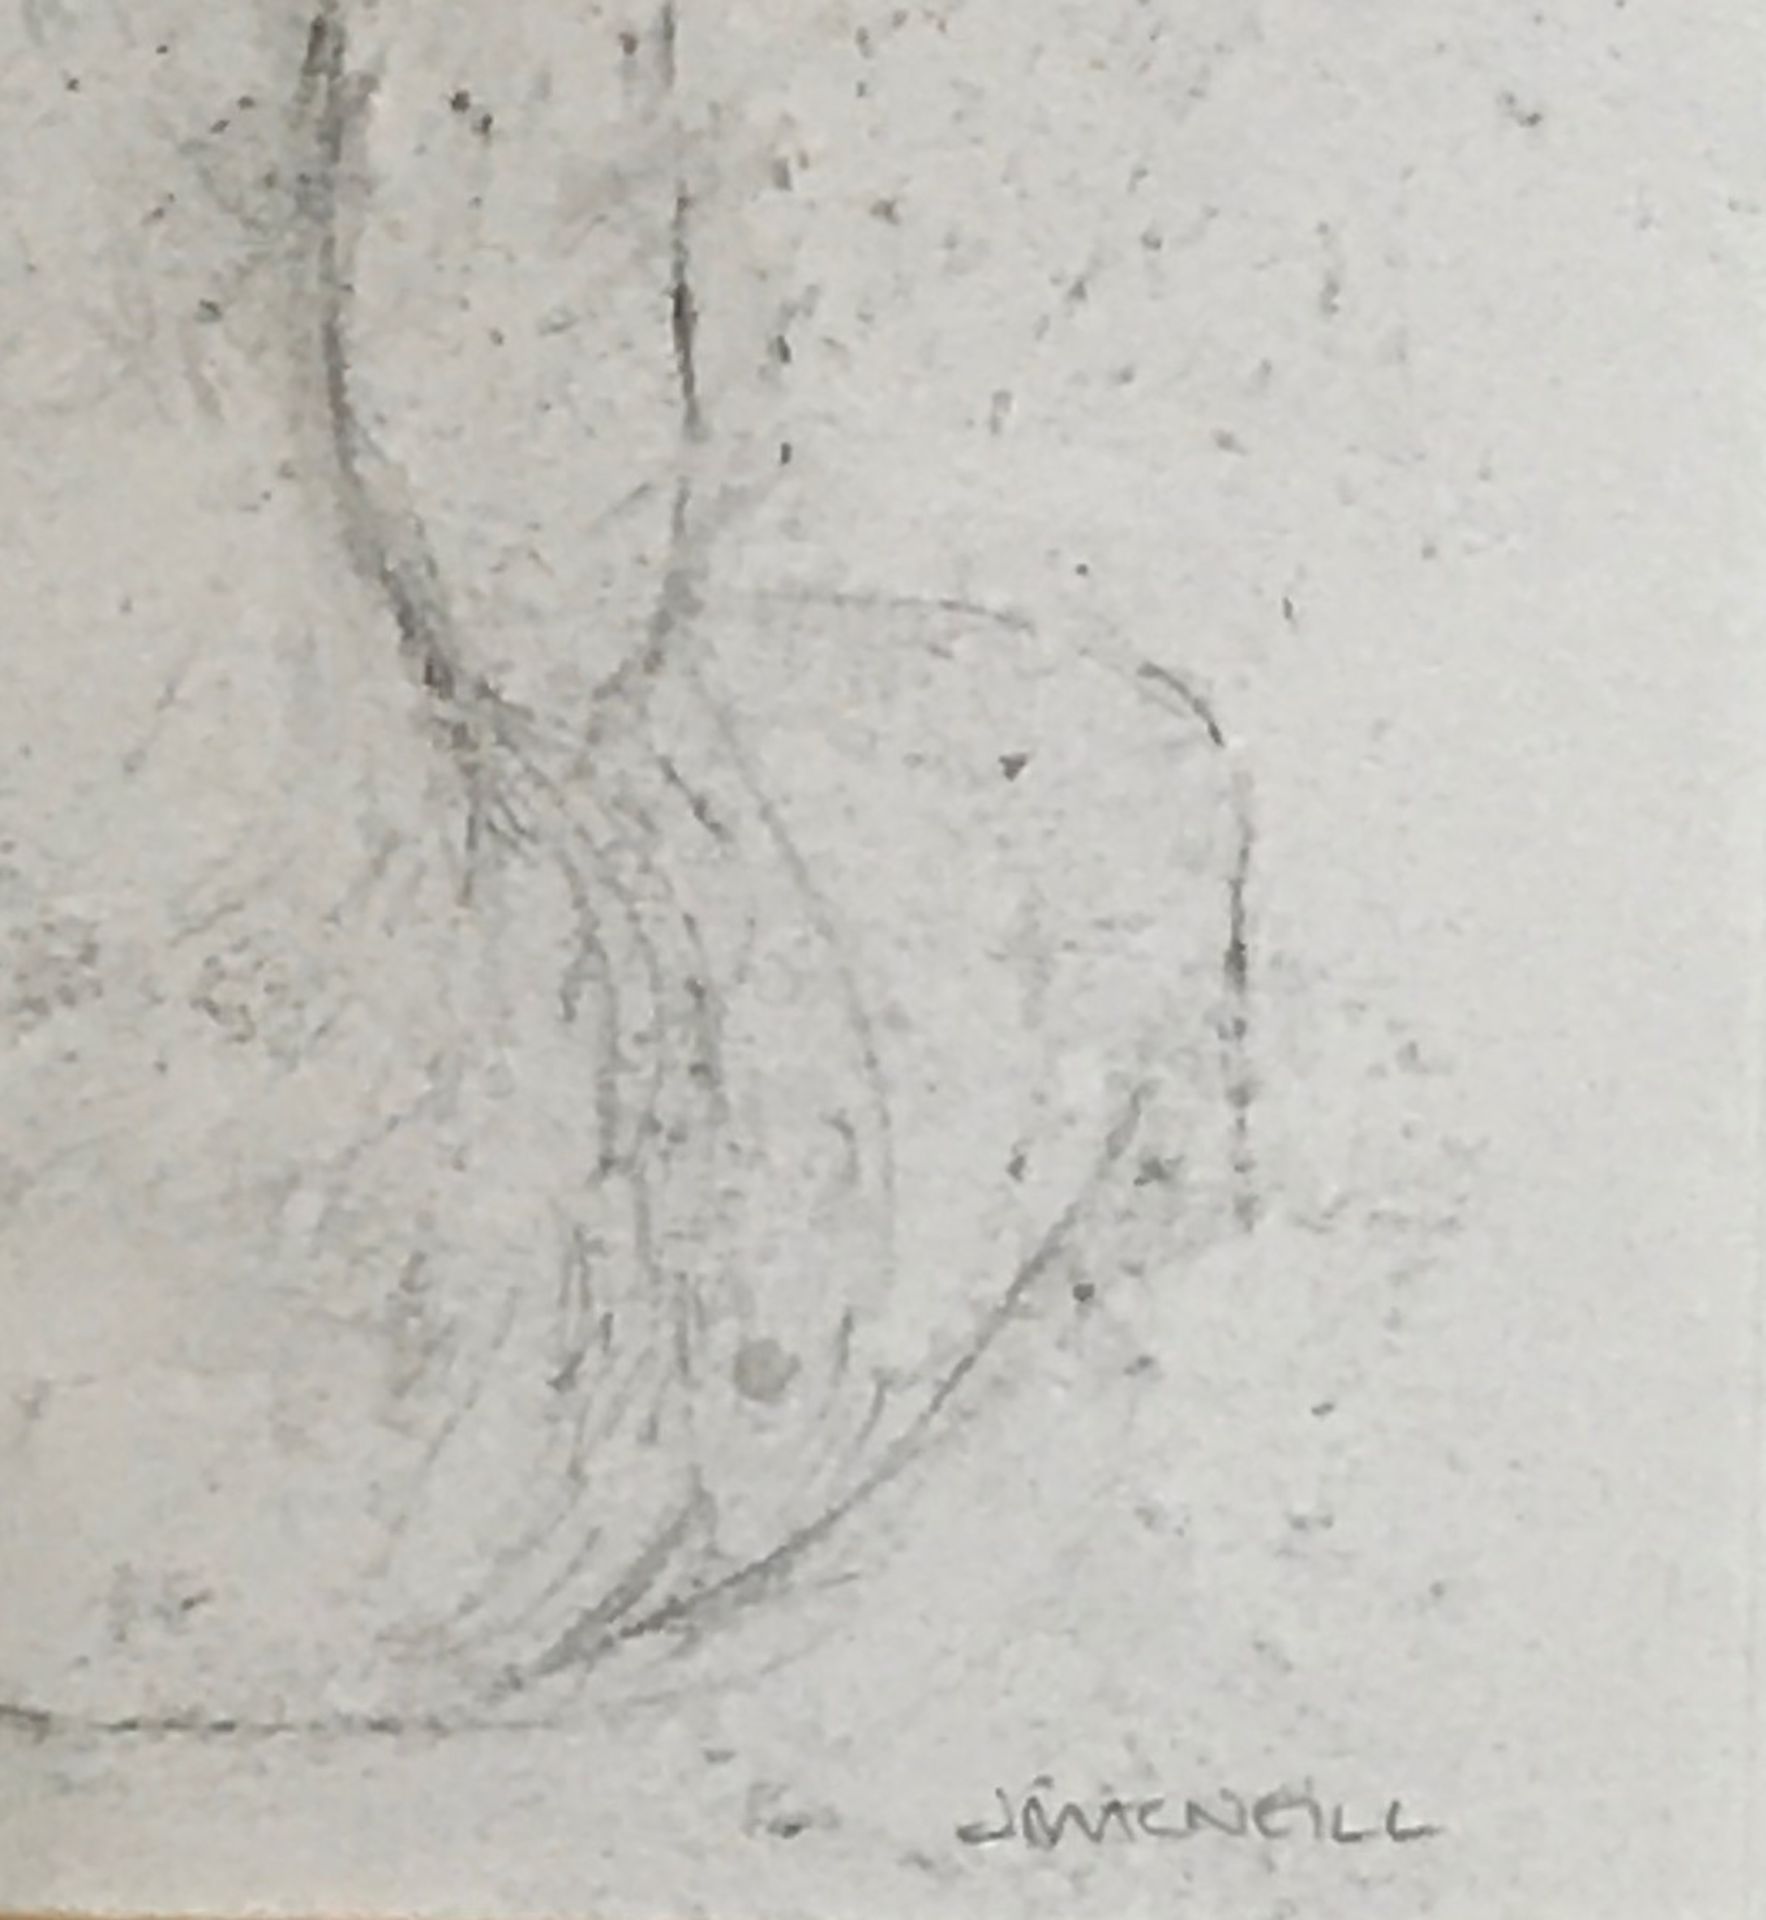 Sitting nude , original pencil drawing by Scottish artist Jane Mcneill Bn 1971 Exhibited R.S.A - Image 3 of 4